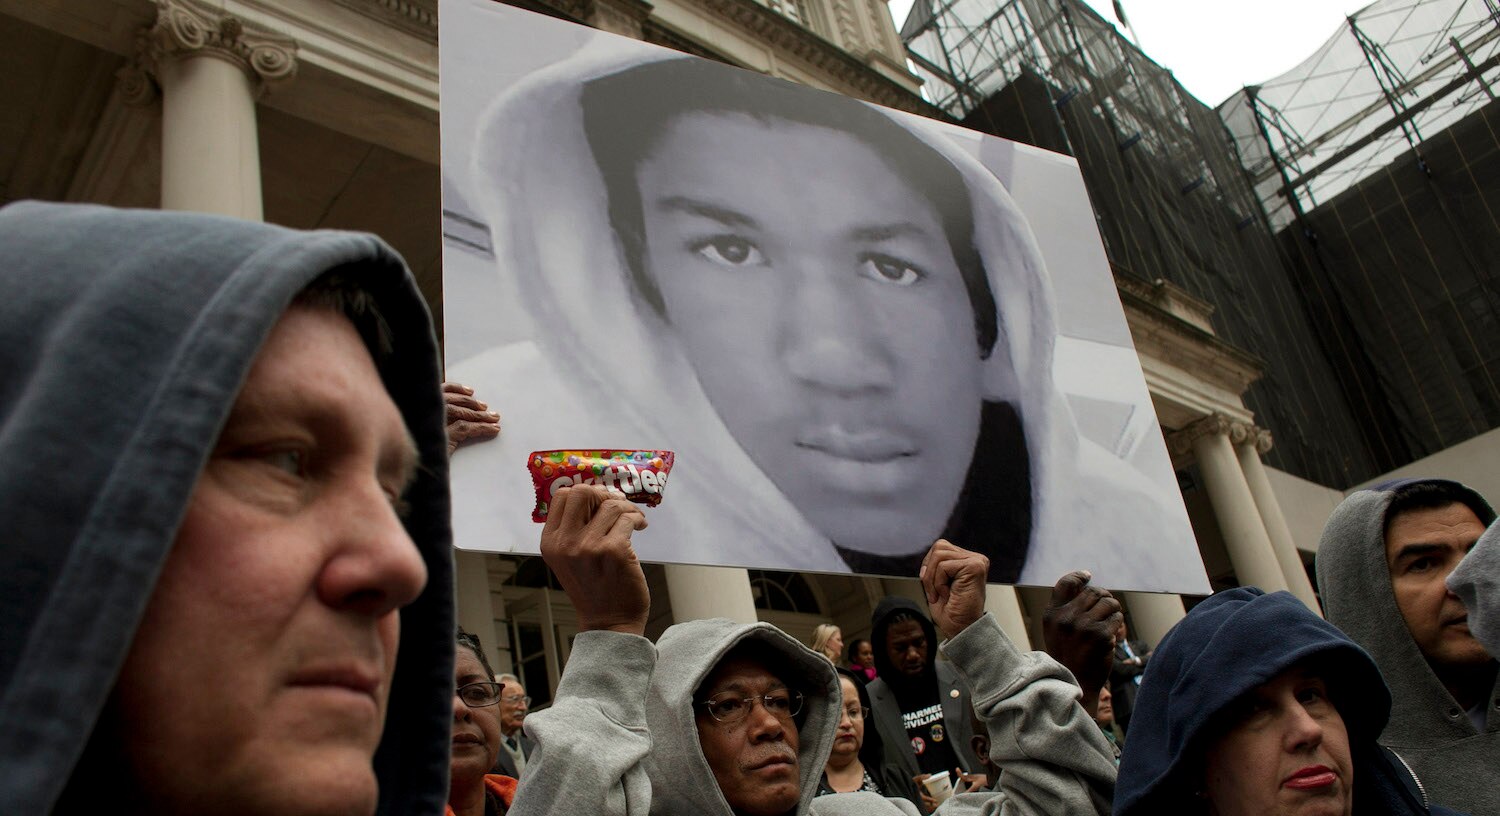 Official Trailer Of Trayvon Martin Docuseries Released | Very Real